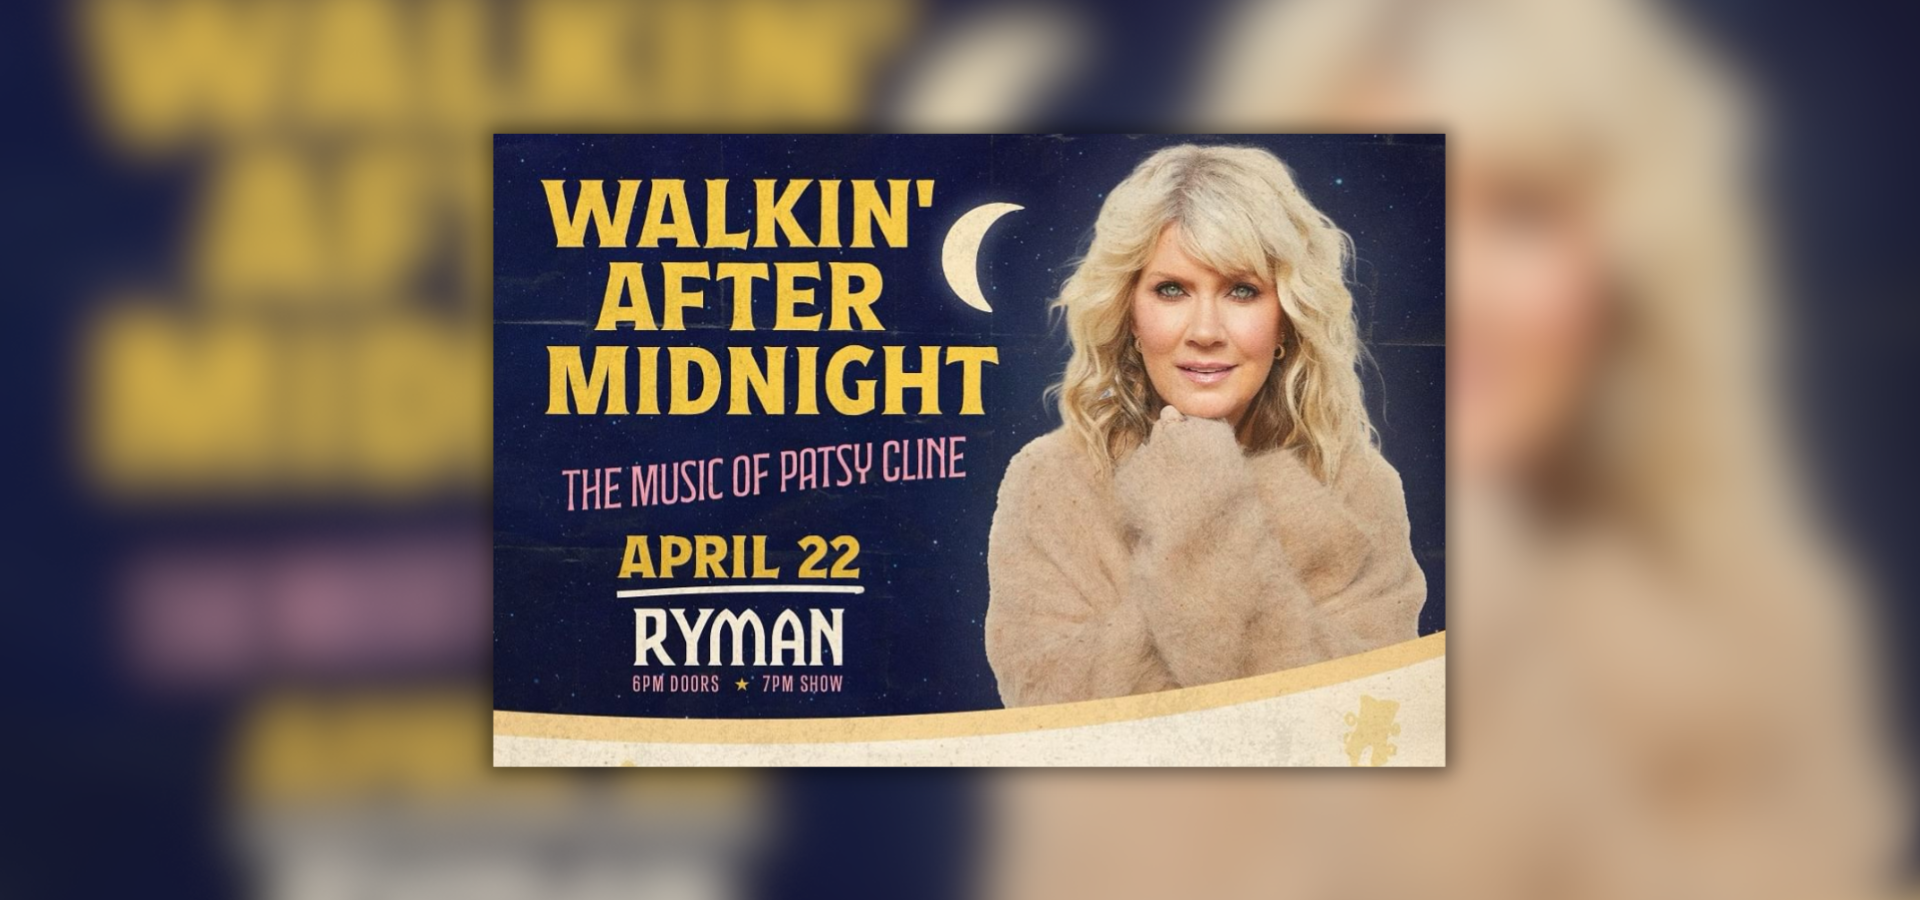 Natalie Grant Performing At Patsy Cline Ryman Event